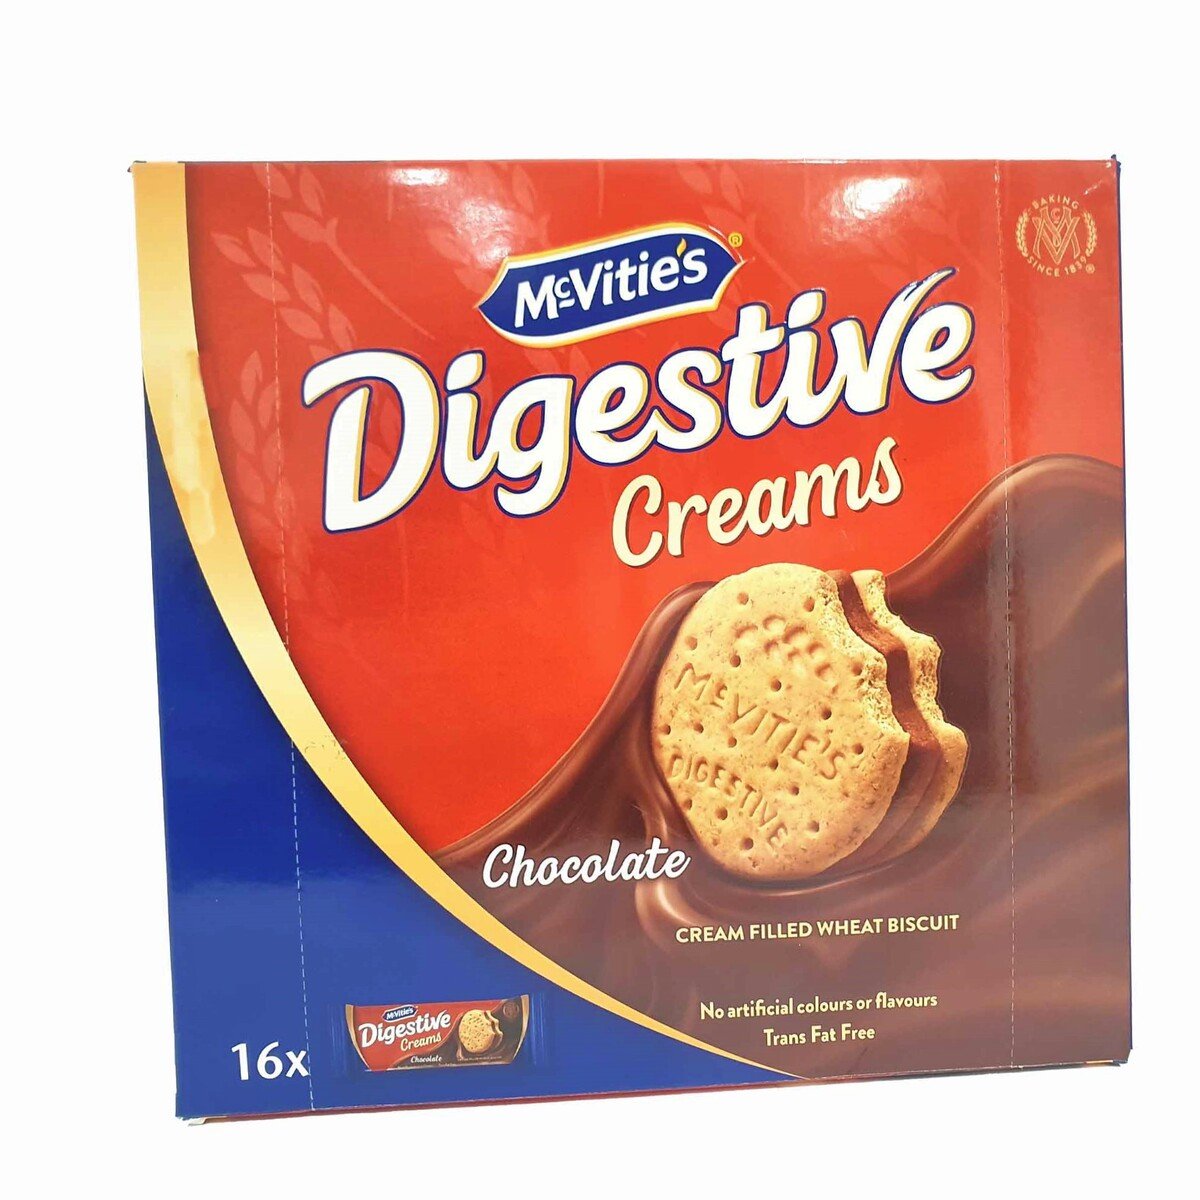 McVitie's Digestive Creams Chocolate Filled Wheat Biscuit 16 x 40 g